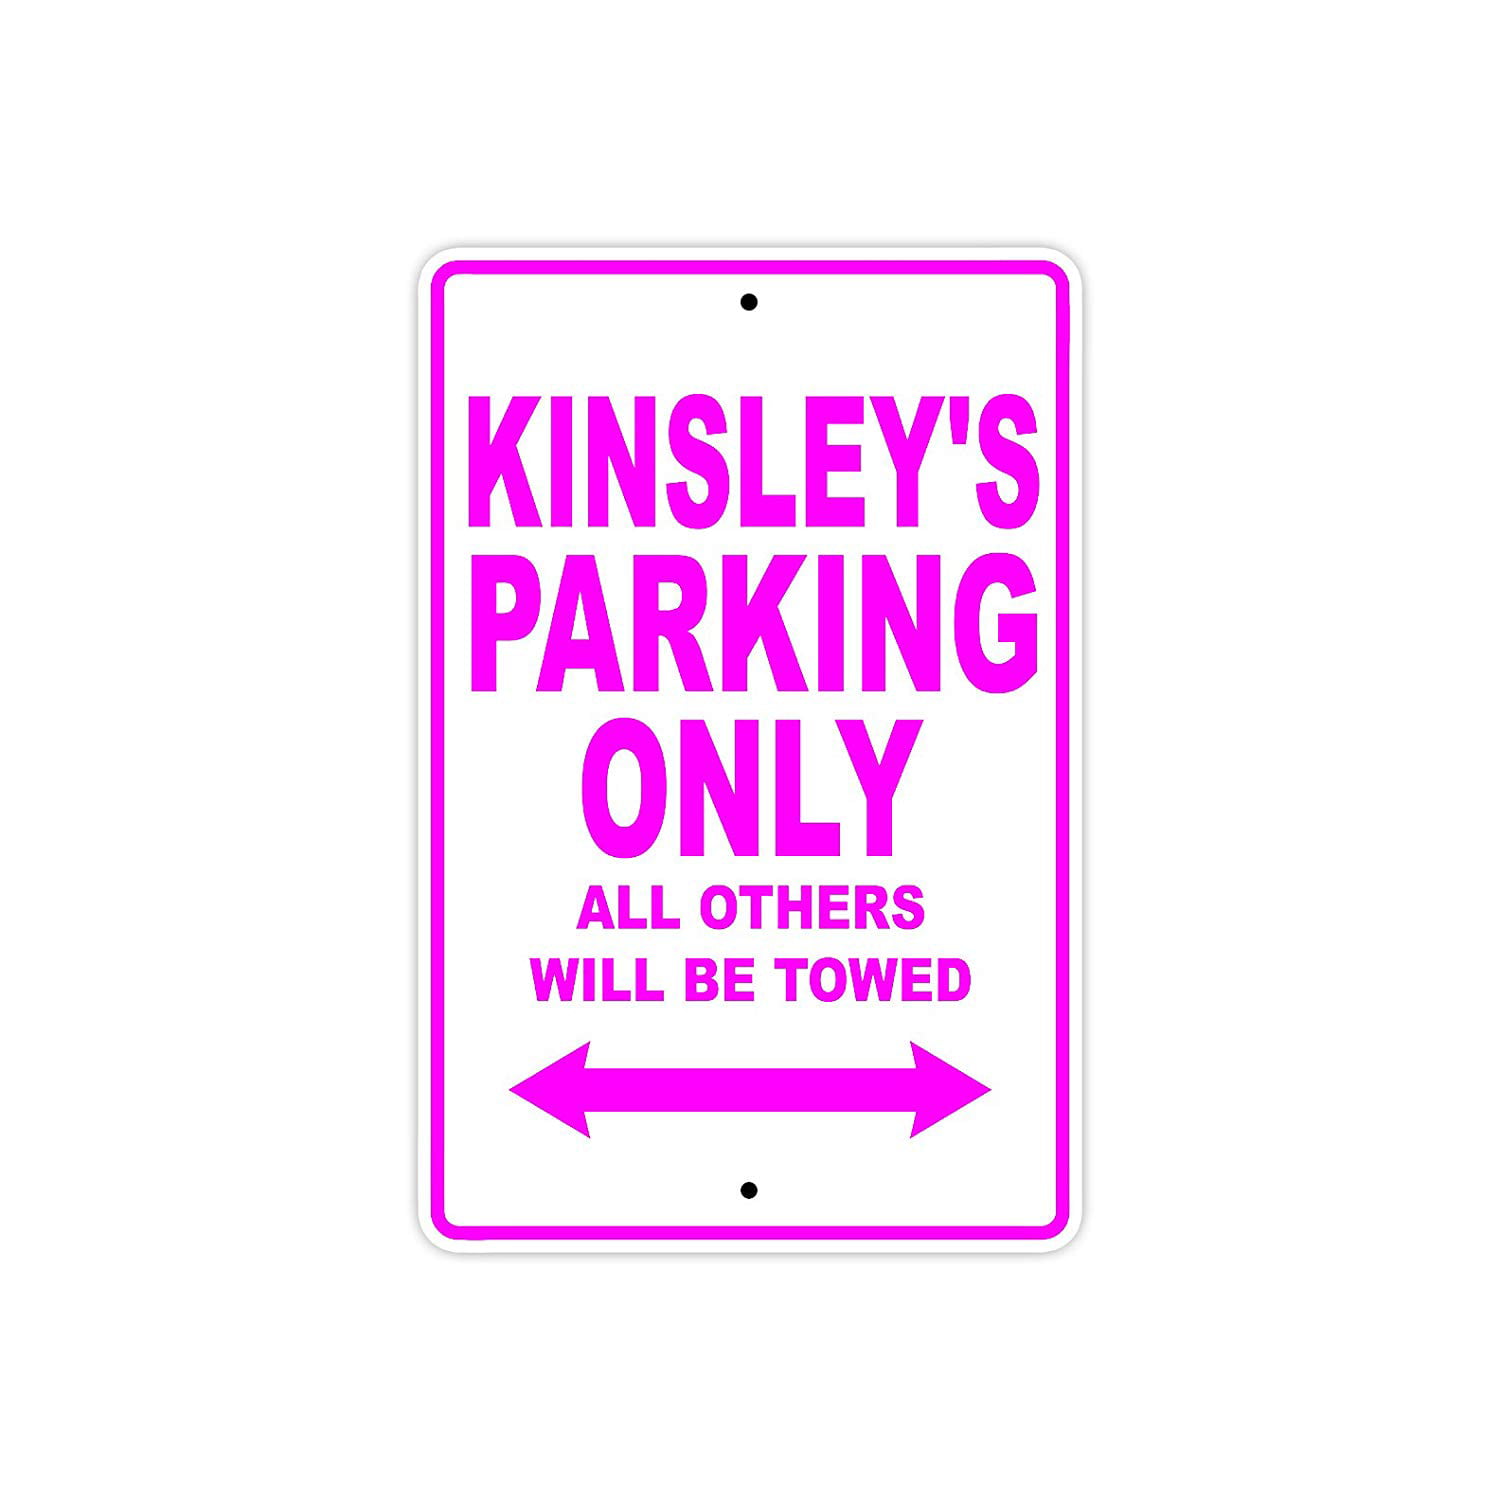 Kehlani's Parking Only All Others Will Be Towed Name Novelty Metal Aluminum Sign 